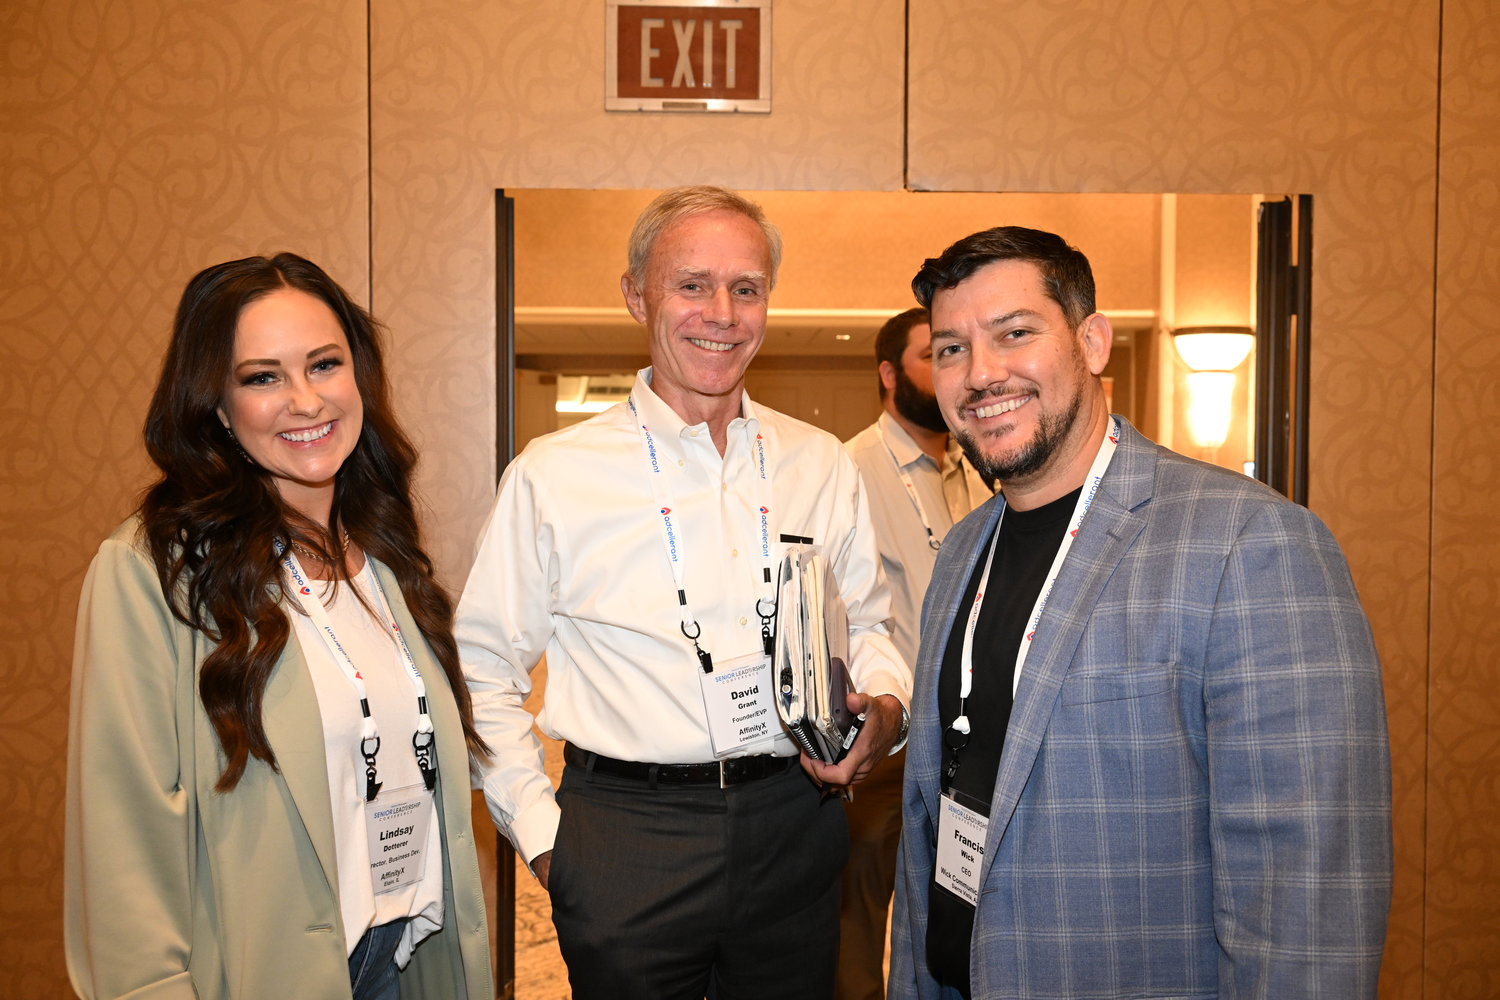 Lindsay Dotterer, director of business development, AffinityX; David Grant, founder and EVP, AffinityX; and Francis Wick, CEO, Wick Communications. (Photo by Jeff Strout)